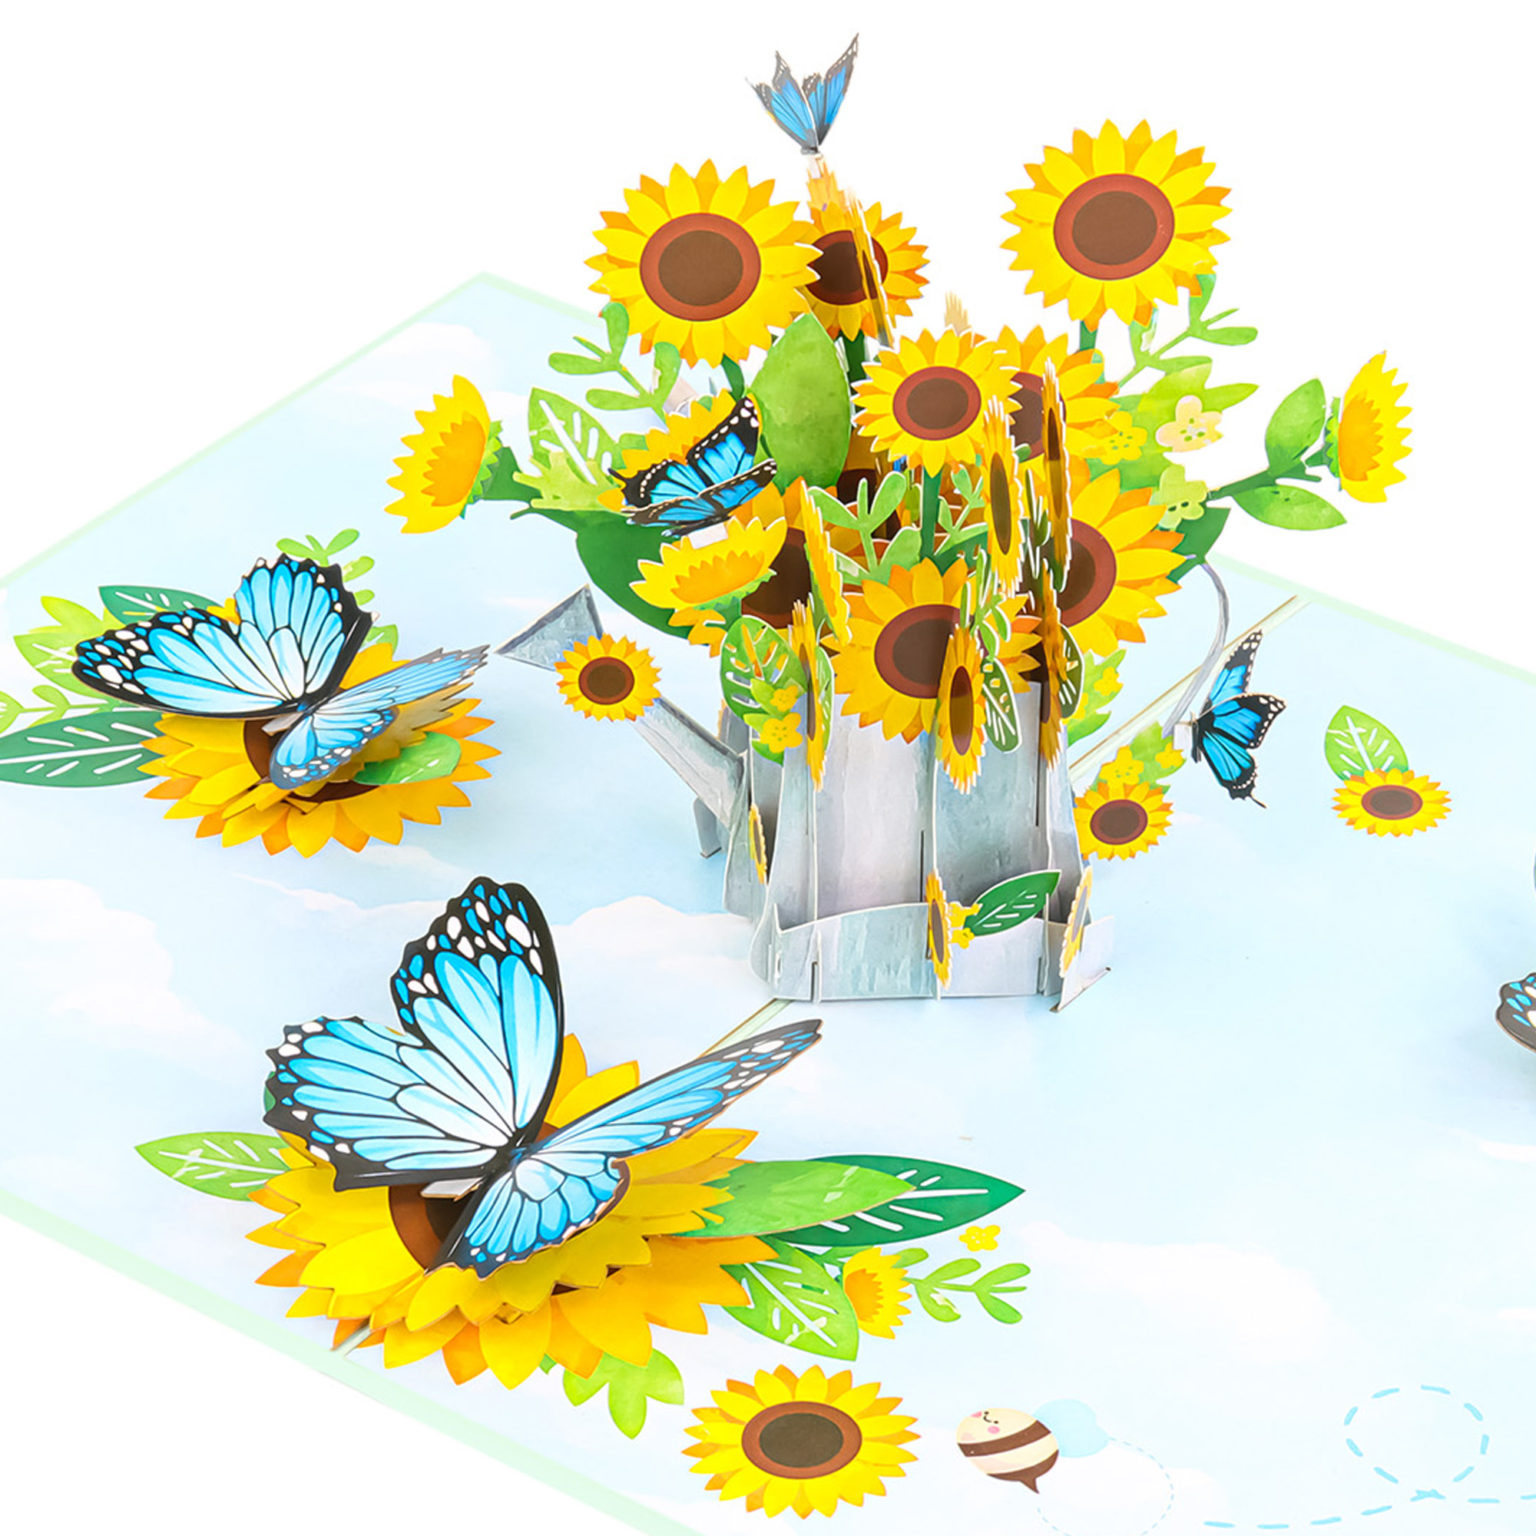 Watering-Can-Sunflower-Bouquet-Pop-Up-Card-detail-wholesale-manufacture-custom-design-custom-custom-pop-up-birthday-card-just-because-pop-up-card-summer-po